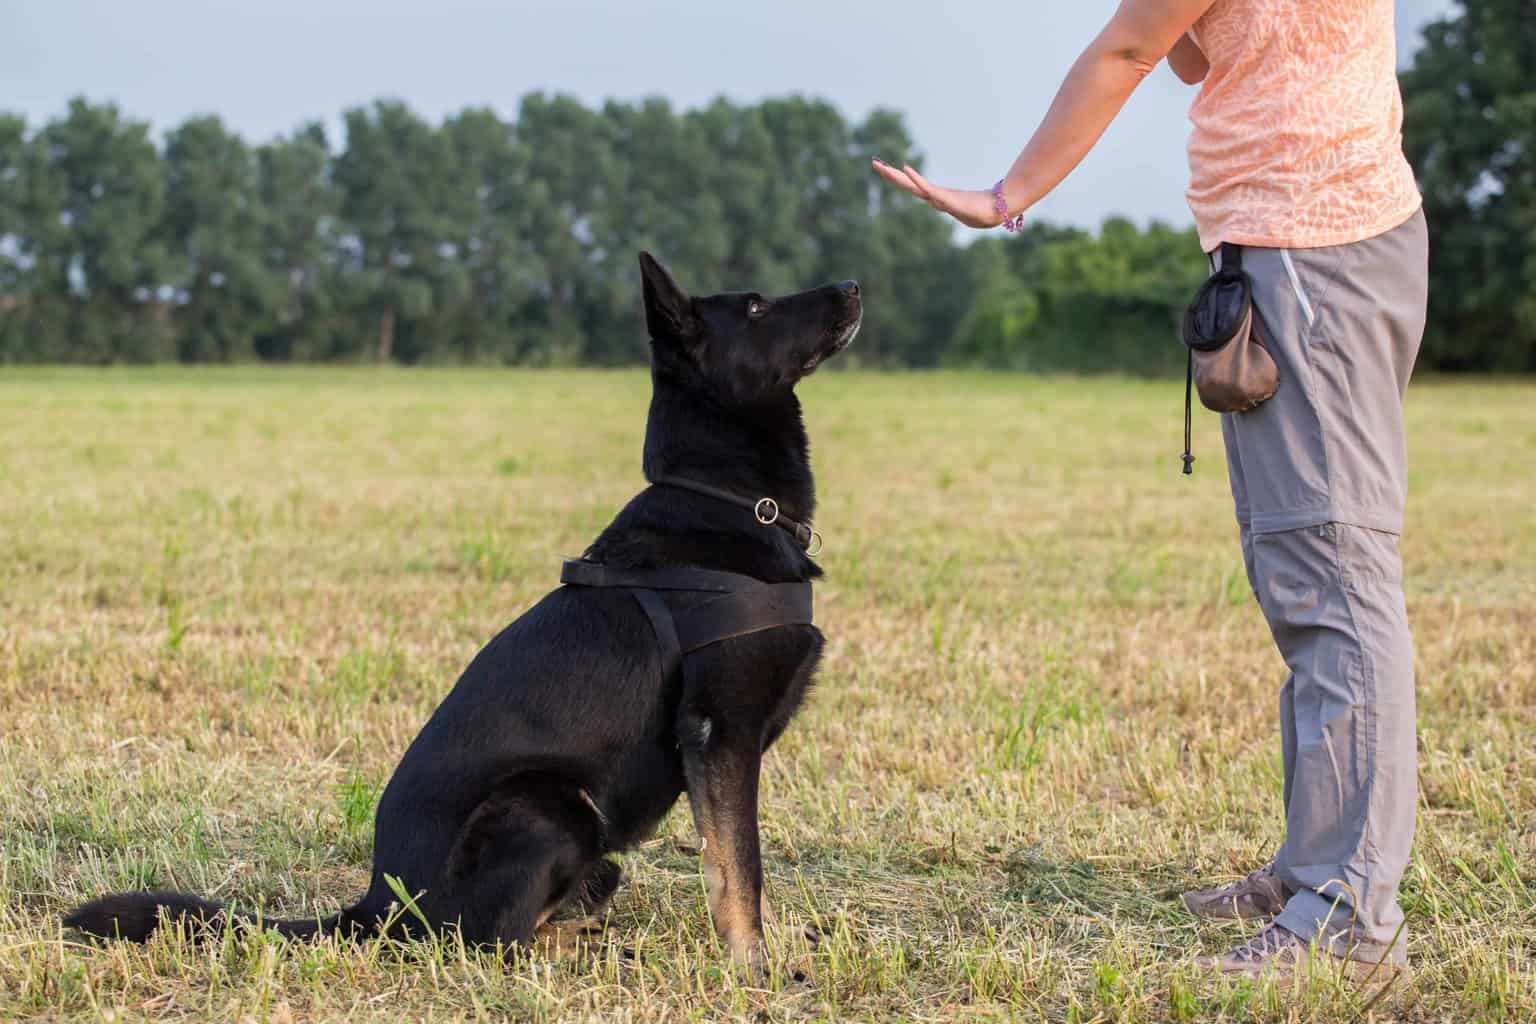 Owner trains black German shepherd to sit. Training can be a lot of fun, but getting all the details right is essential. So take time to prepare to train your dog before you start.